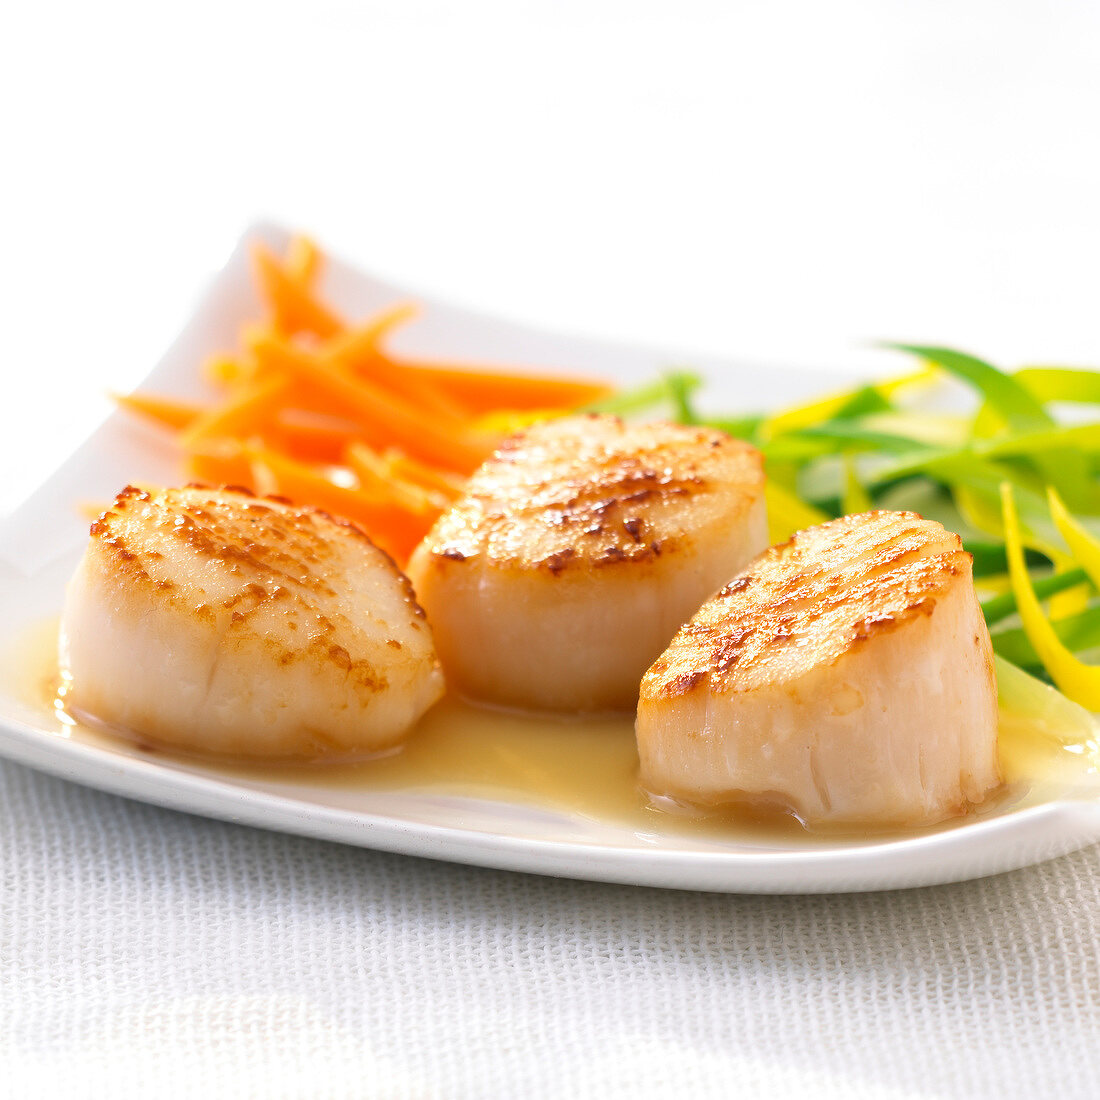 Roasted scallops with truffle-flavored oil